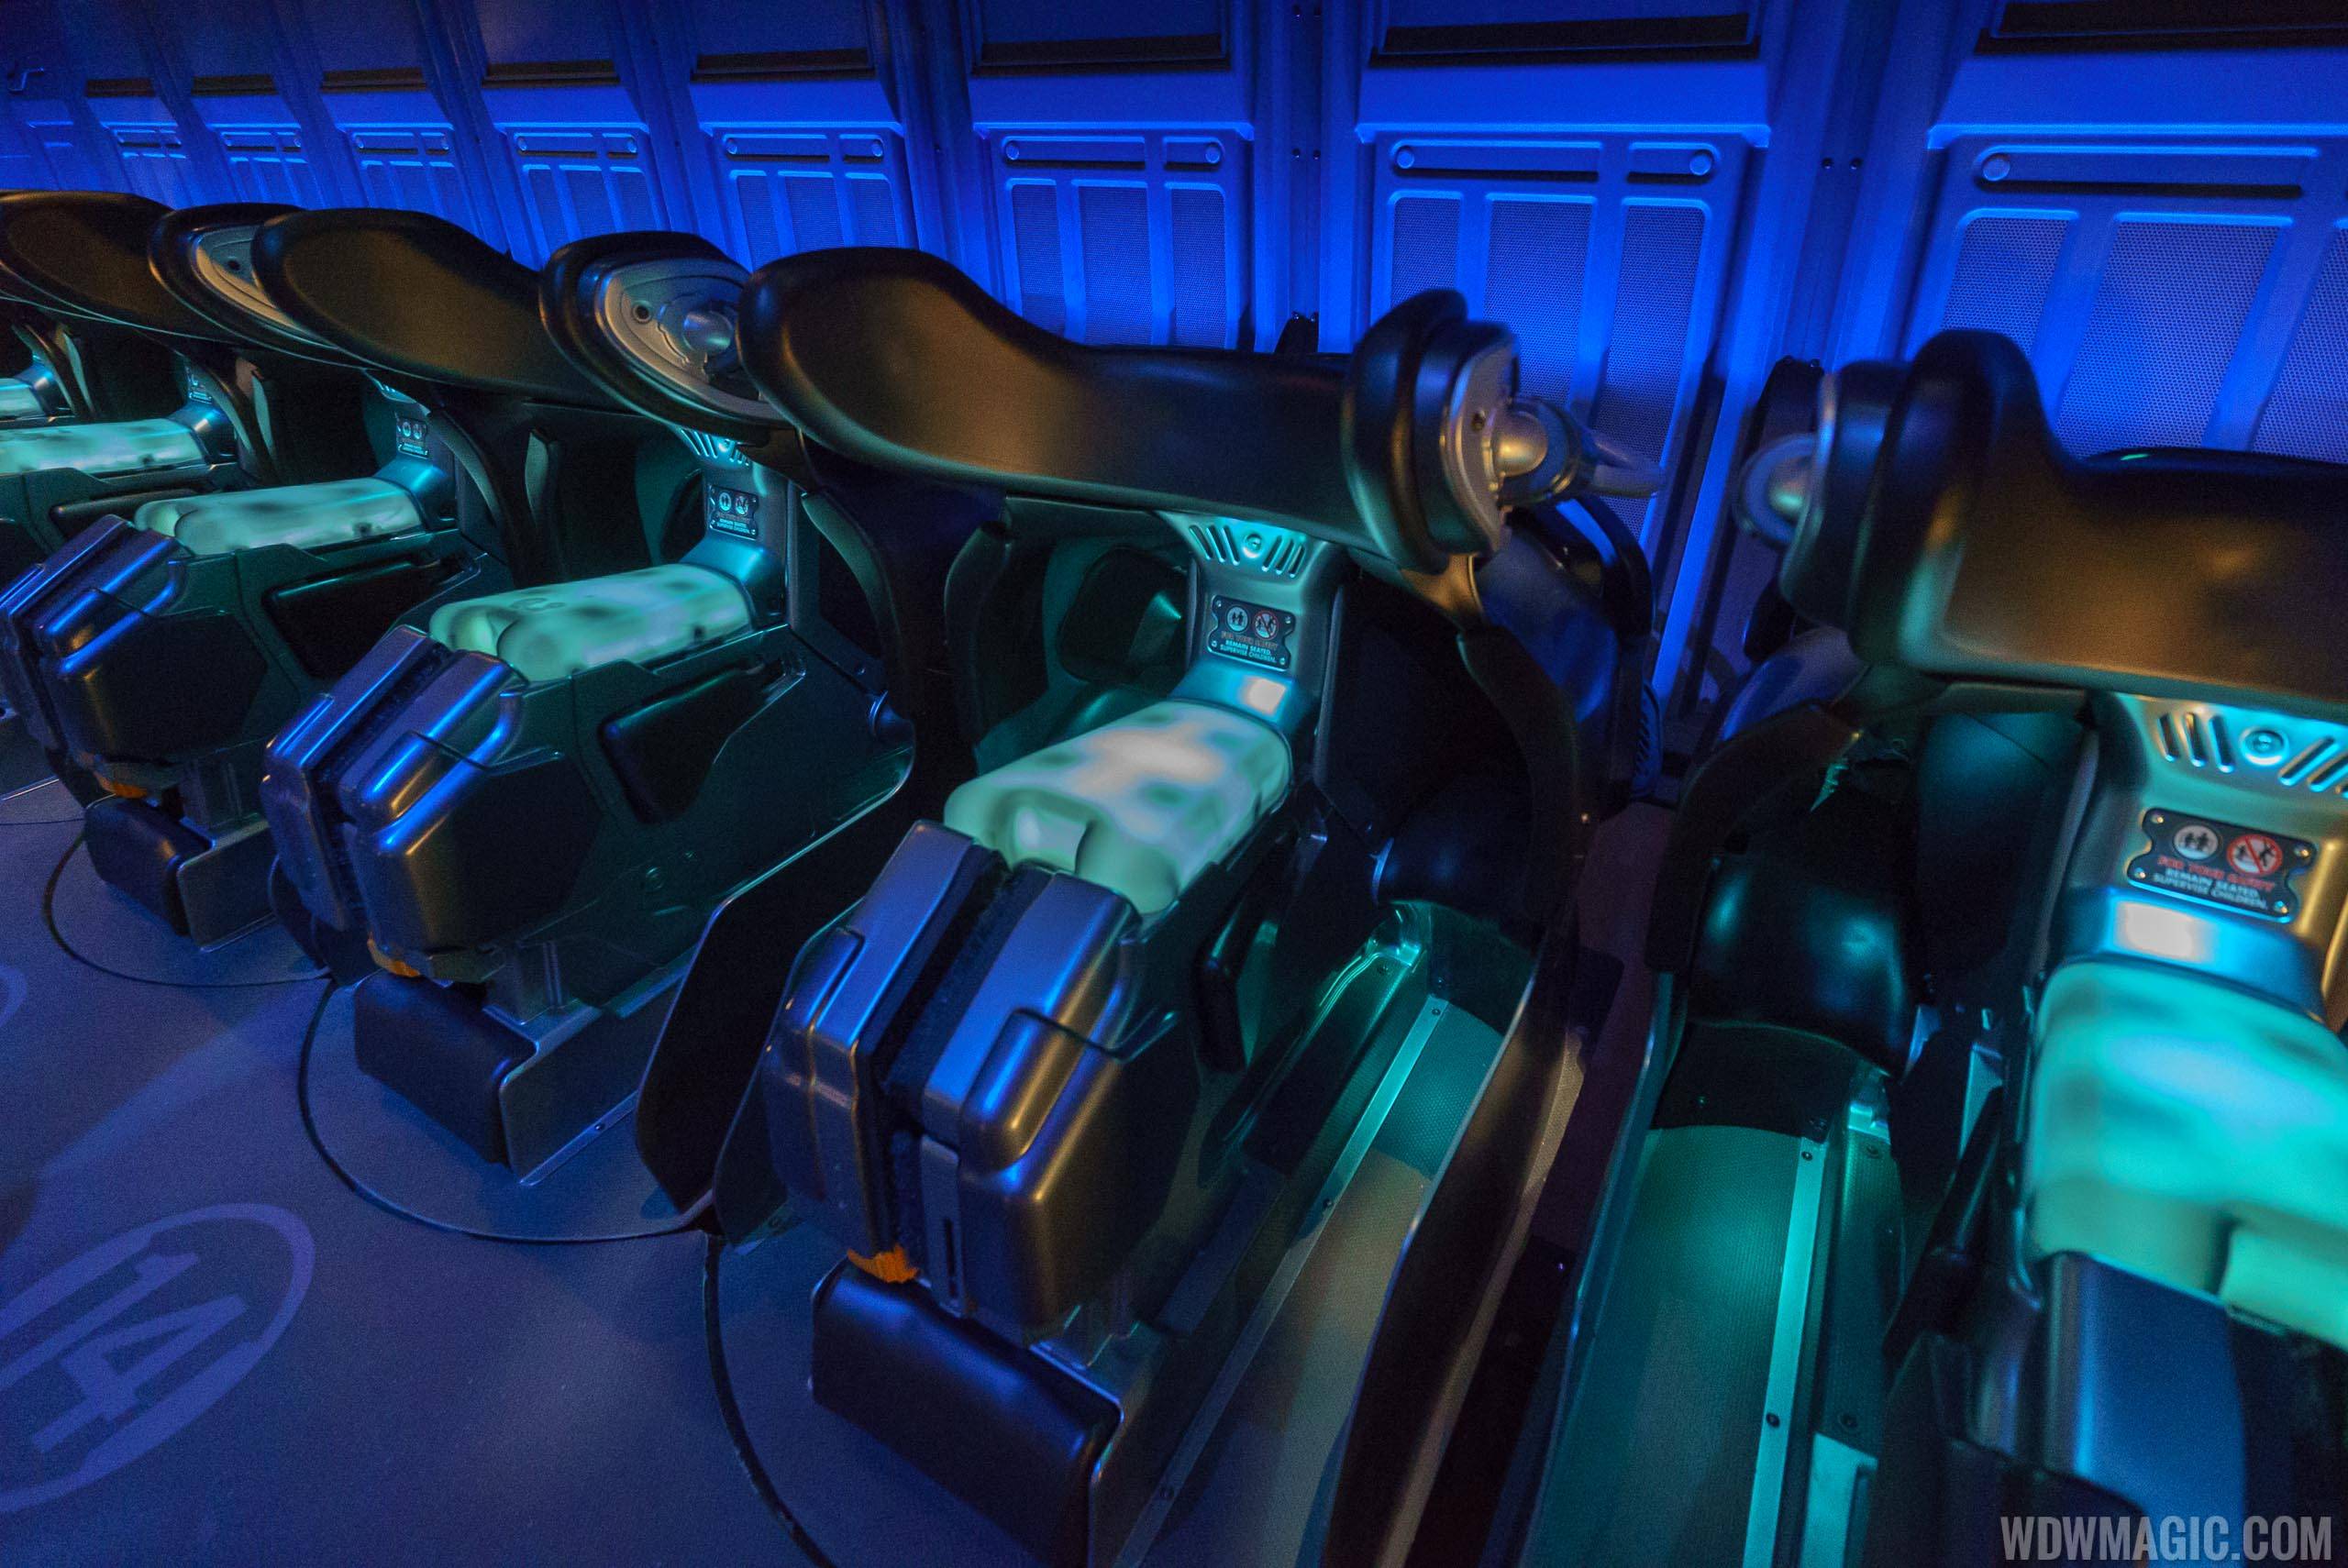 Avatar Flight of Passage is a simulator ride that could be updated with new visuals